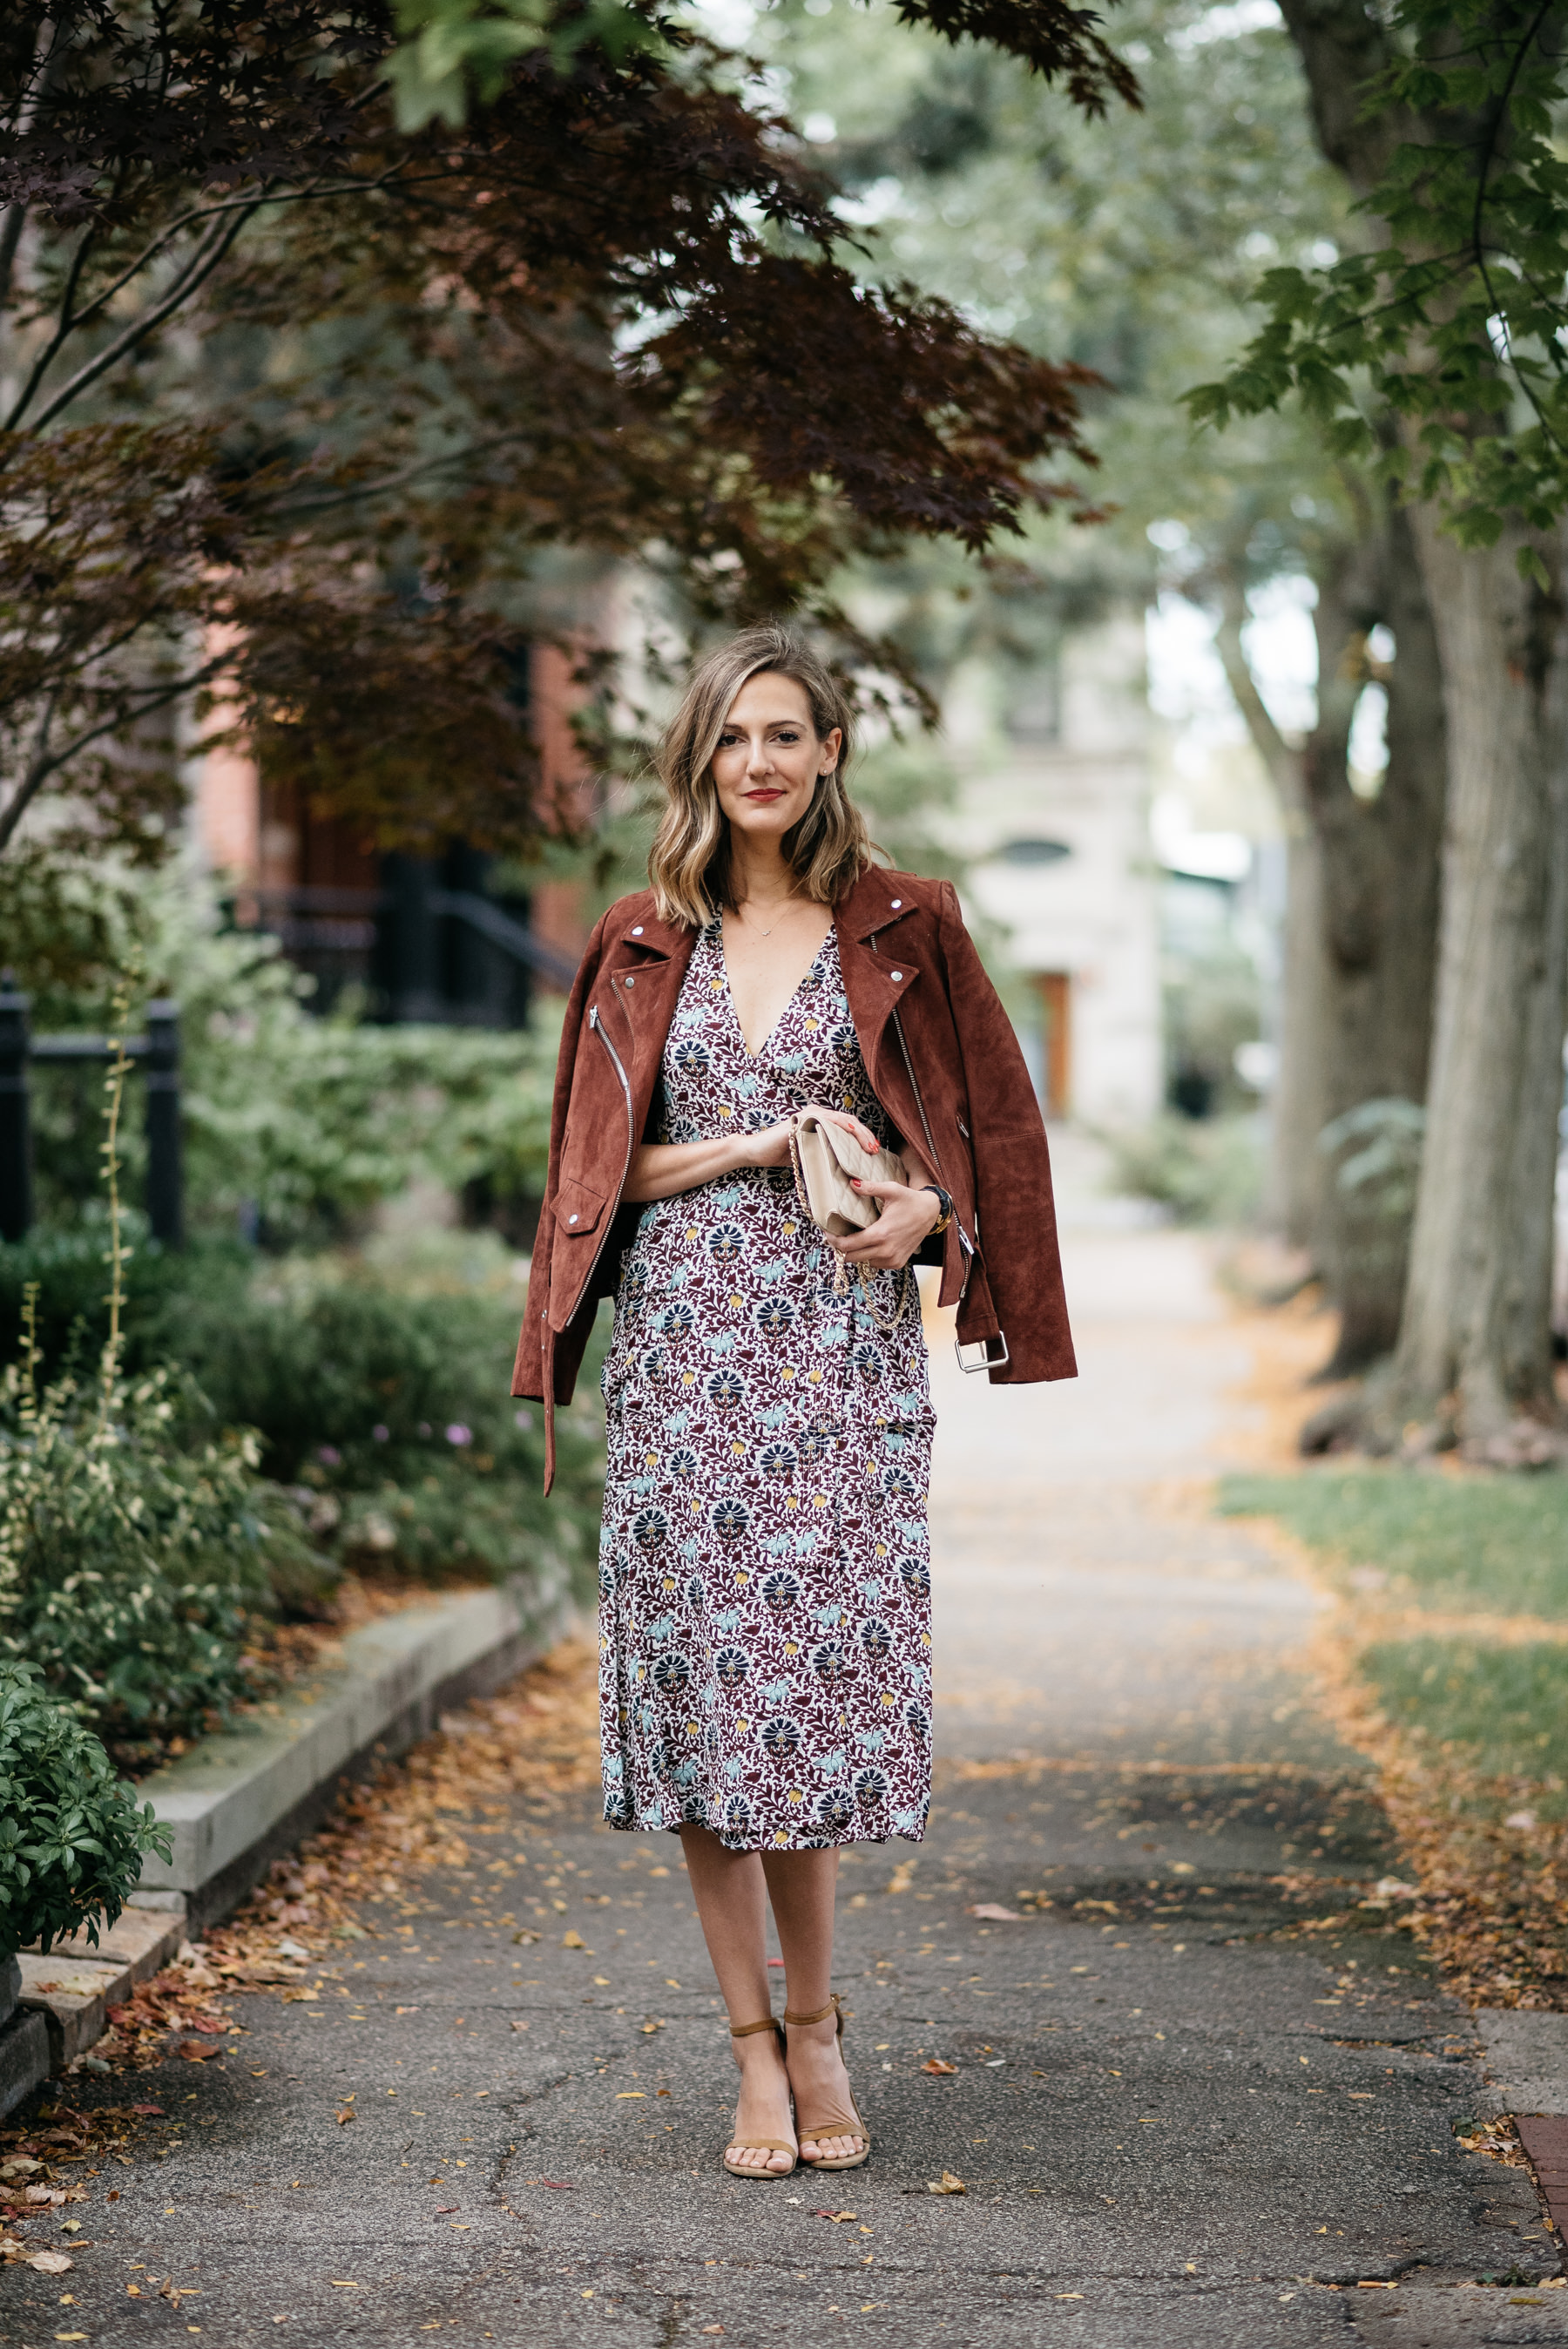 17 Ways To Wear A Dress With A Leather Or Suede Jacket - Styleoholic